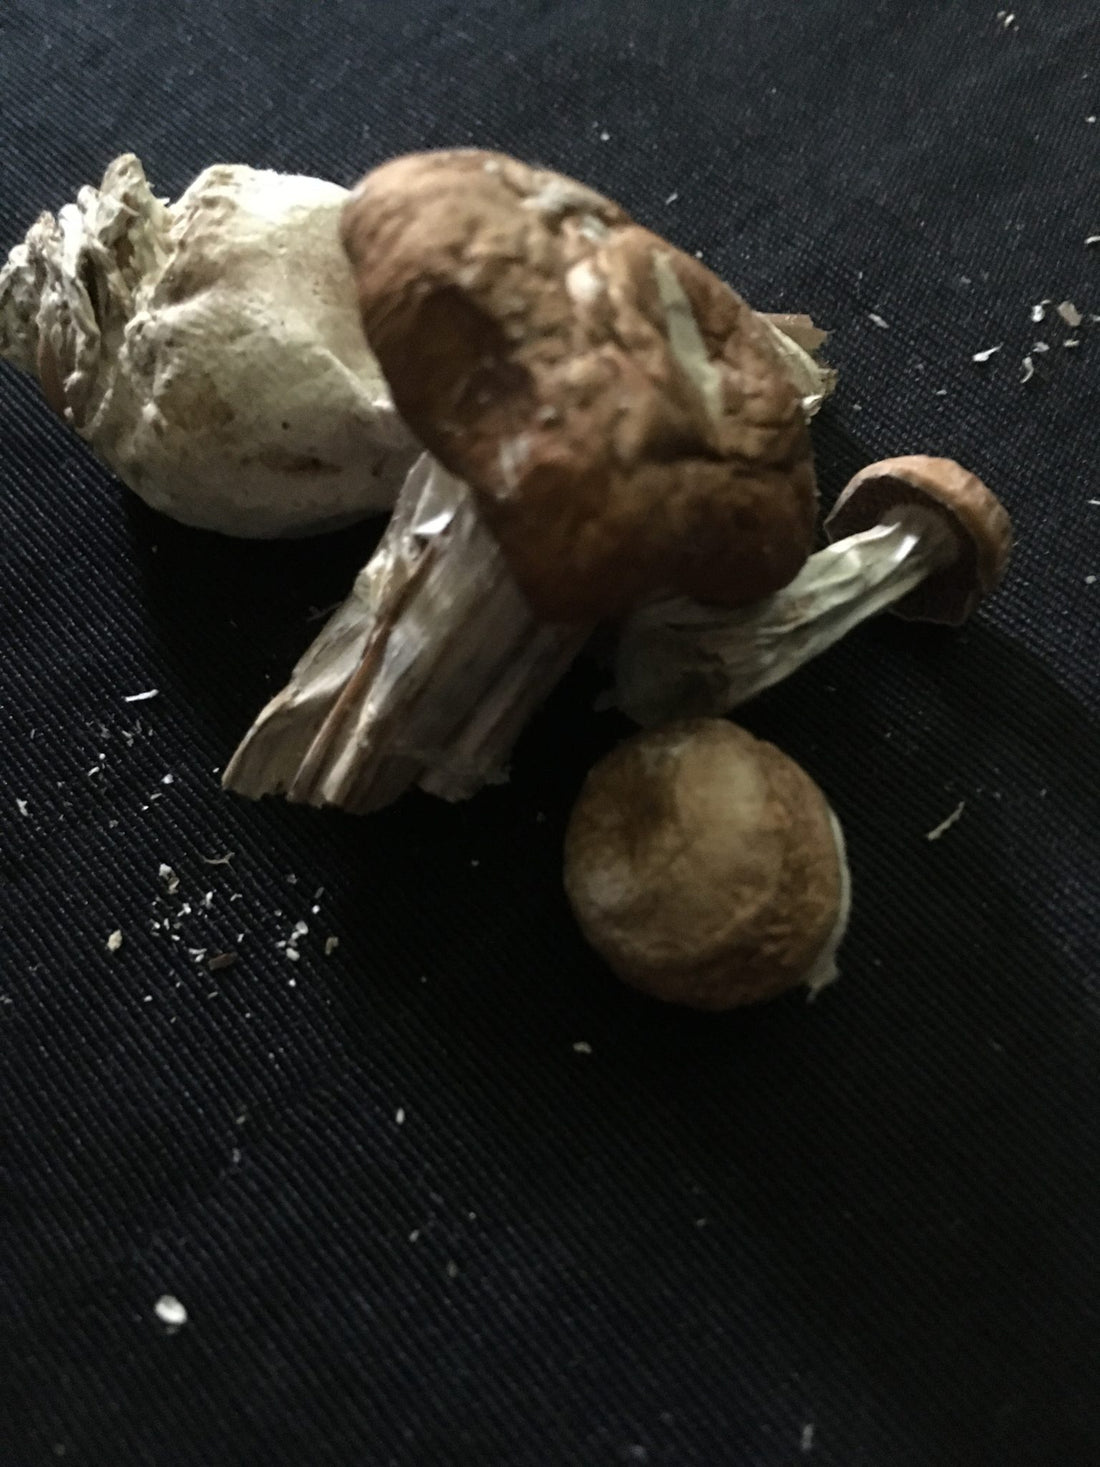 Top 4 Reasons Why Legalized Mushrooms Could Boom in 2020 like Cannabis